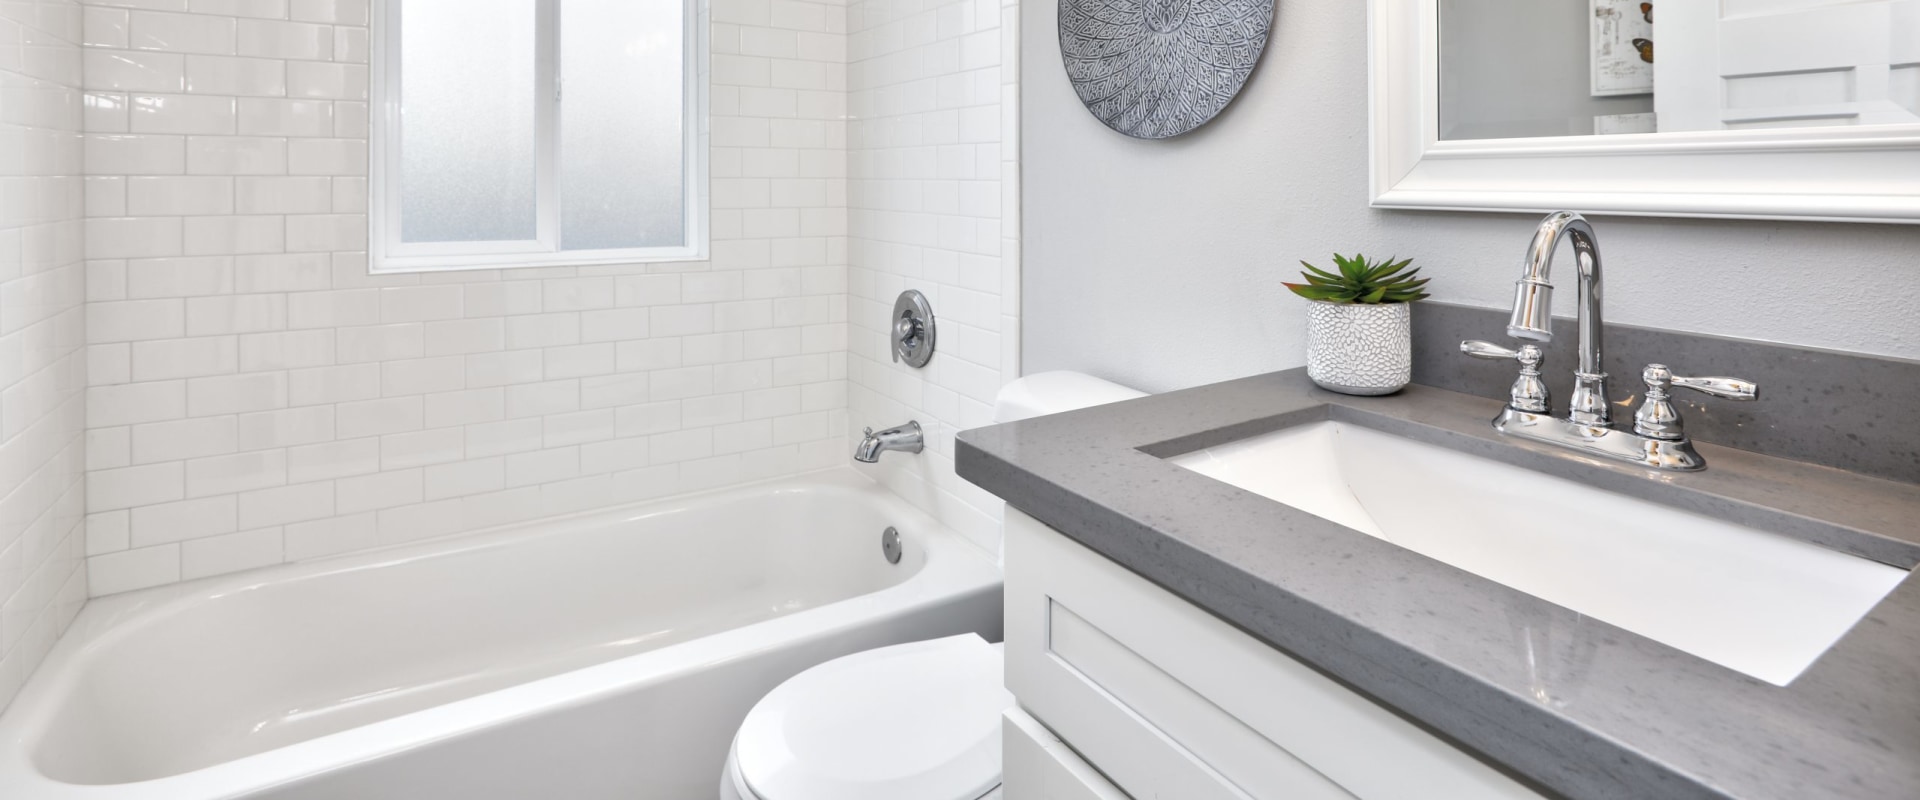 Bathroom Remodeling: A Vital Component of Home Renovation in Chicago